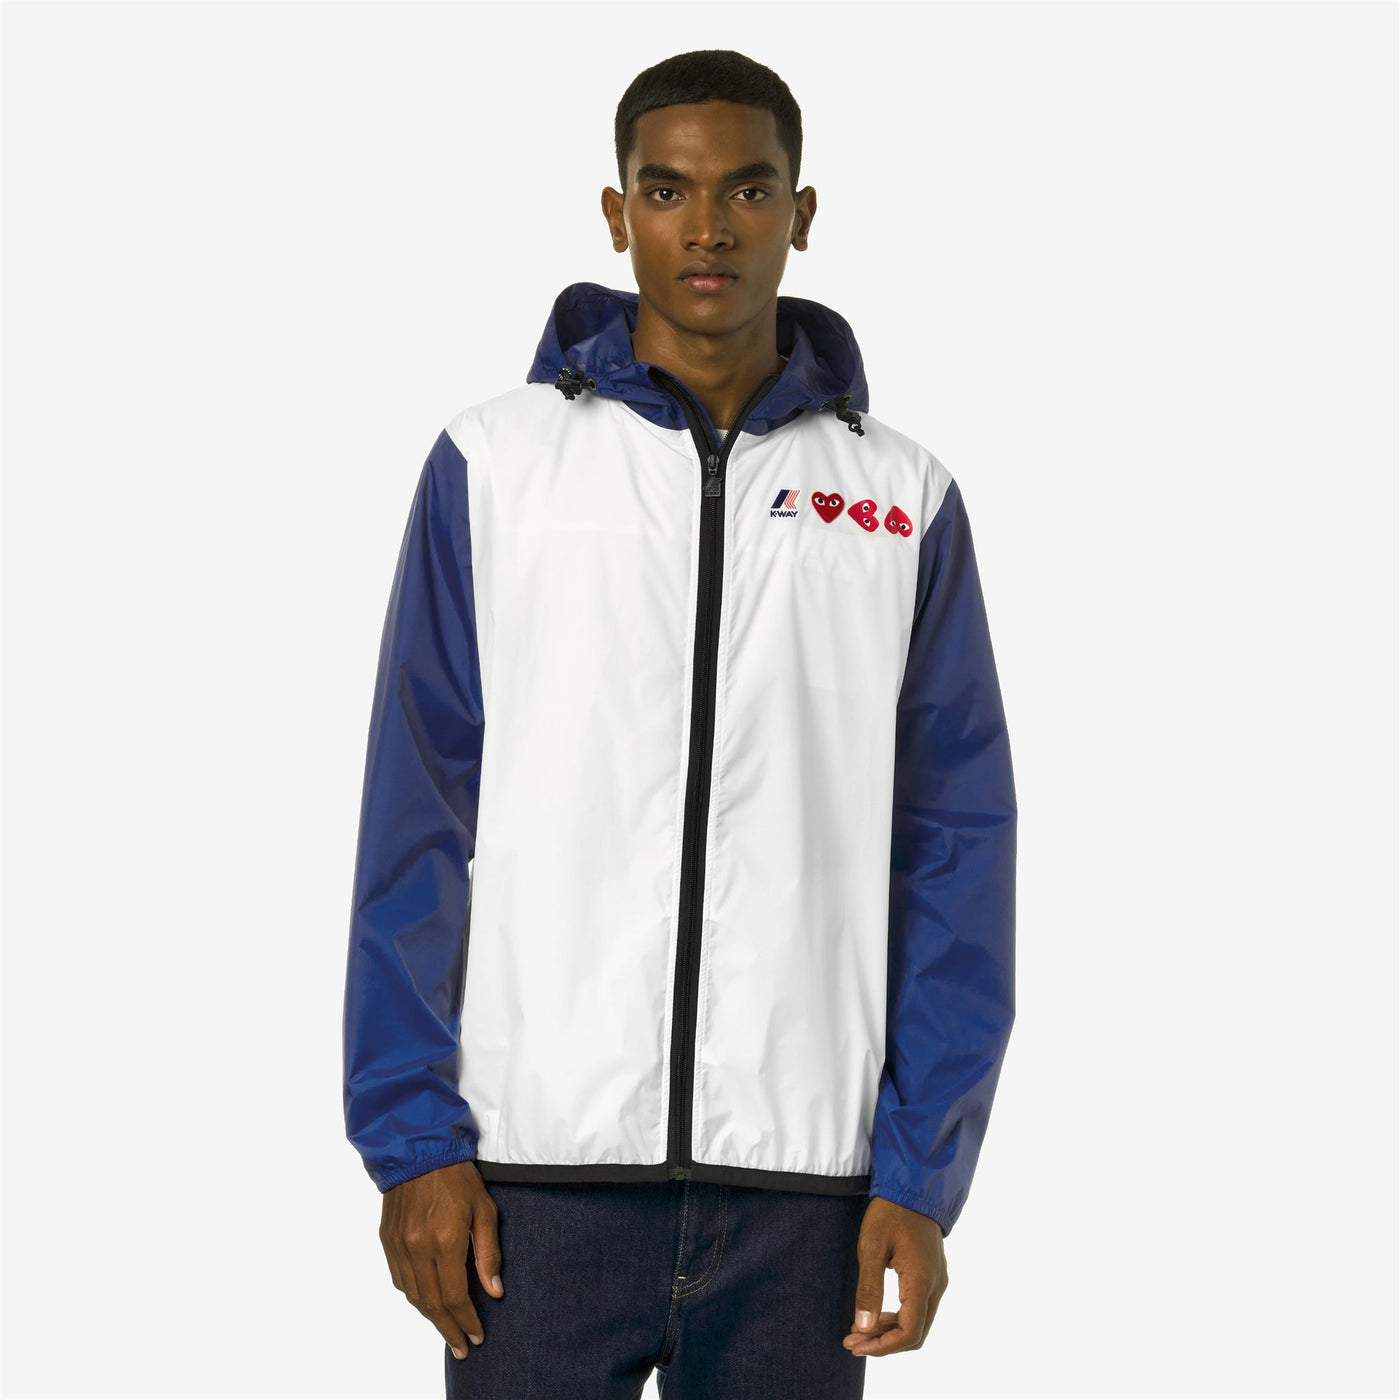 Jackets Unisex LE VRAI 3.0 CLAUDE CDG OPEN US OF SURFING BICOLOR Mid WHITE - BLUE ROYAL MARINE Dressed Back (jpg Rgb)		